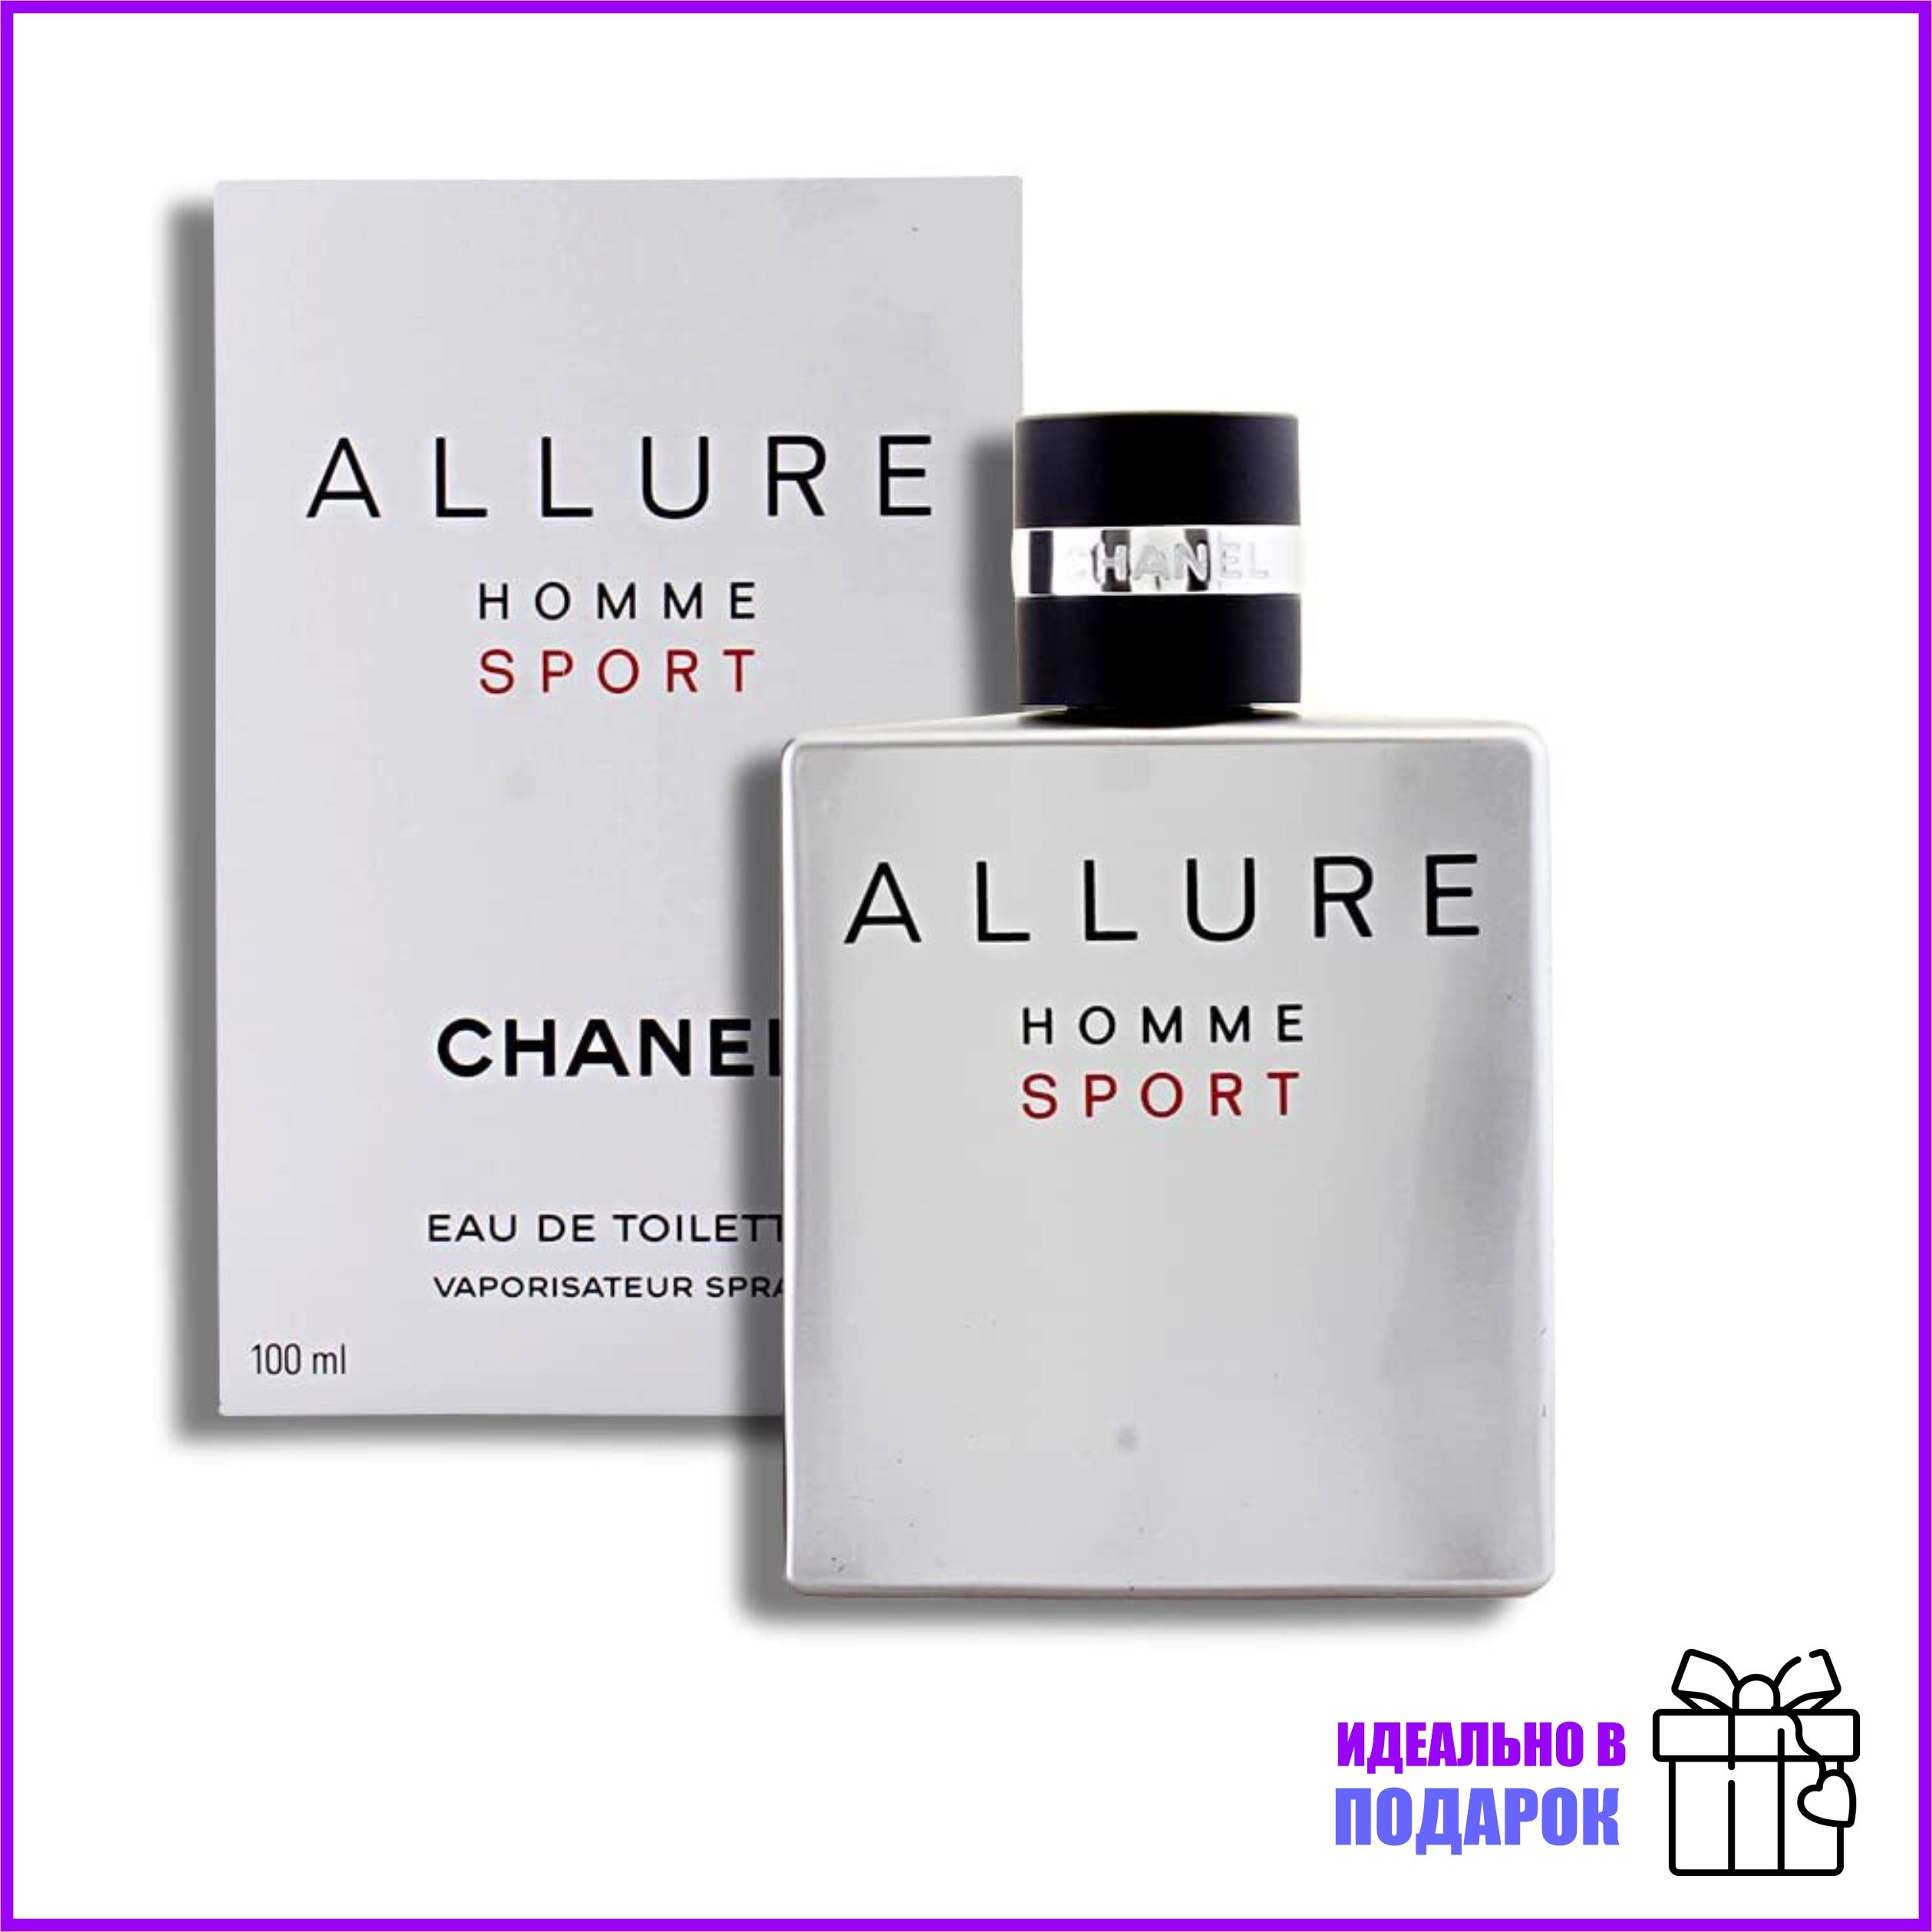 Chanel homme sport цена. Chanel Allure homme Sport 100ml. Allure Chanel 100 ml мужская. Chanel Allure homme Sport 30ml. Chanel Allure homme Sport extreme 100ml.